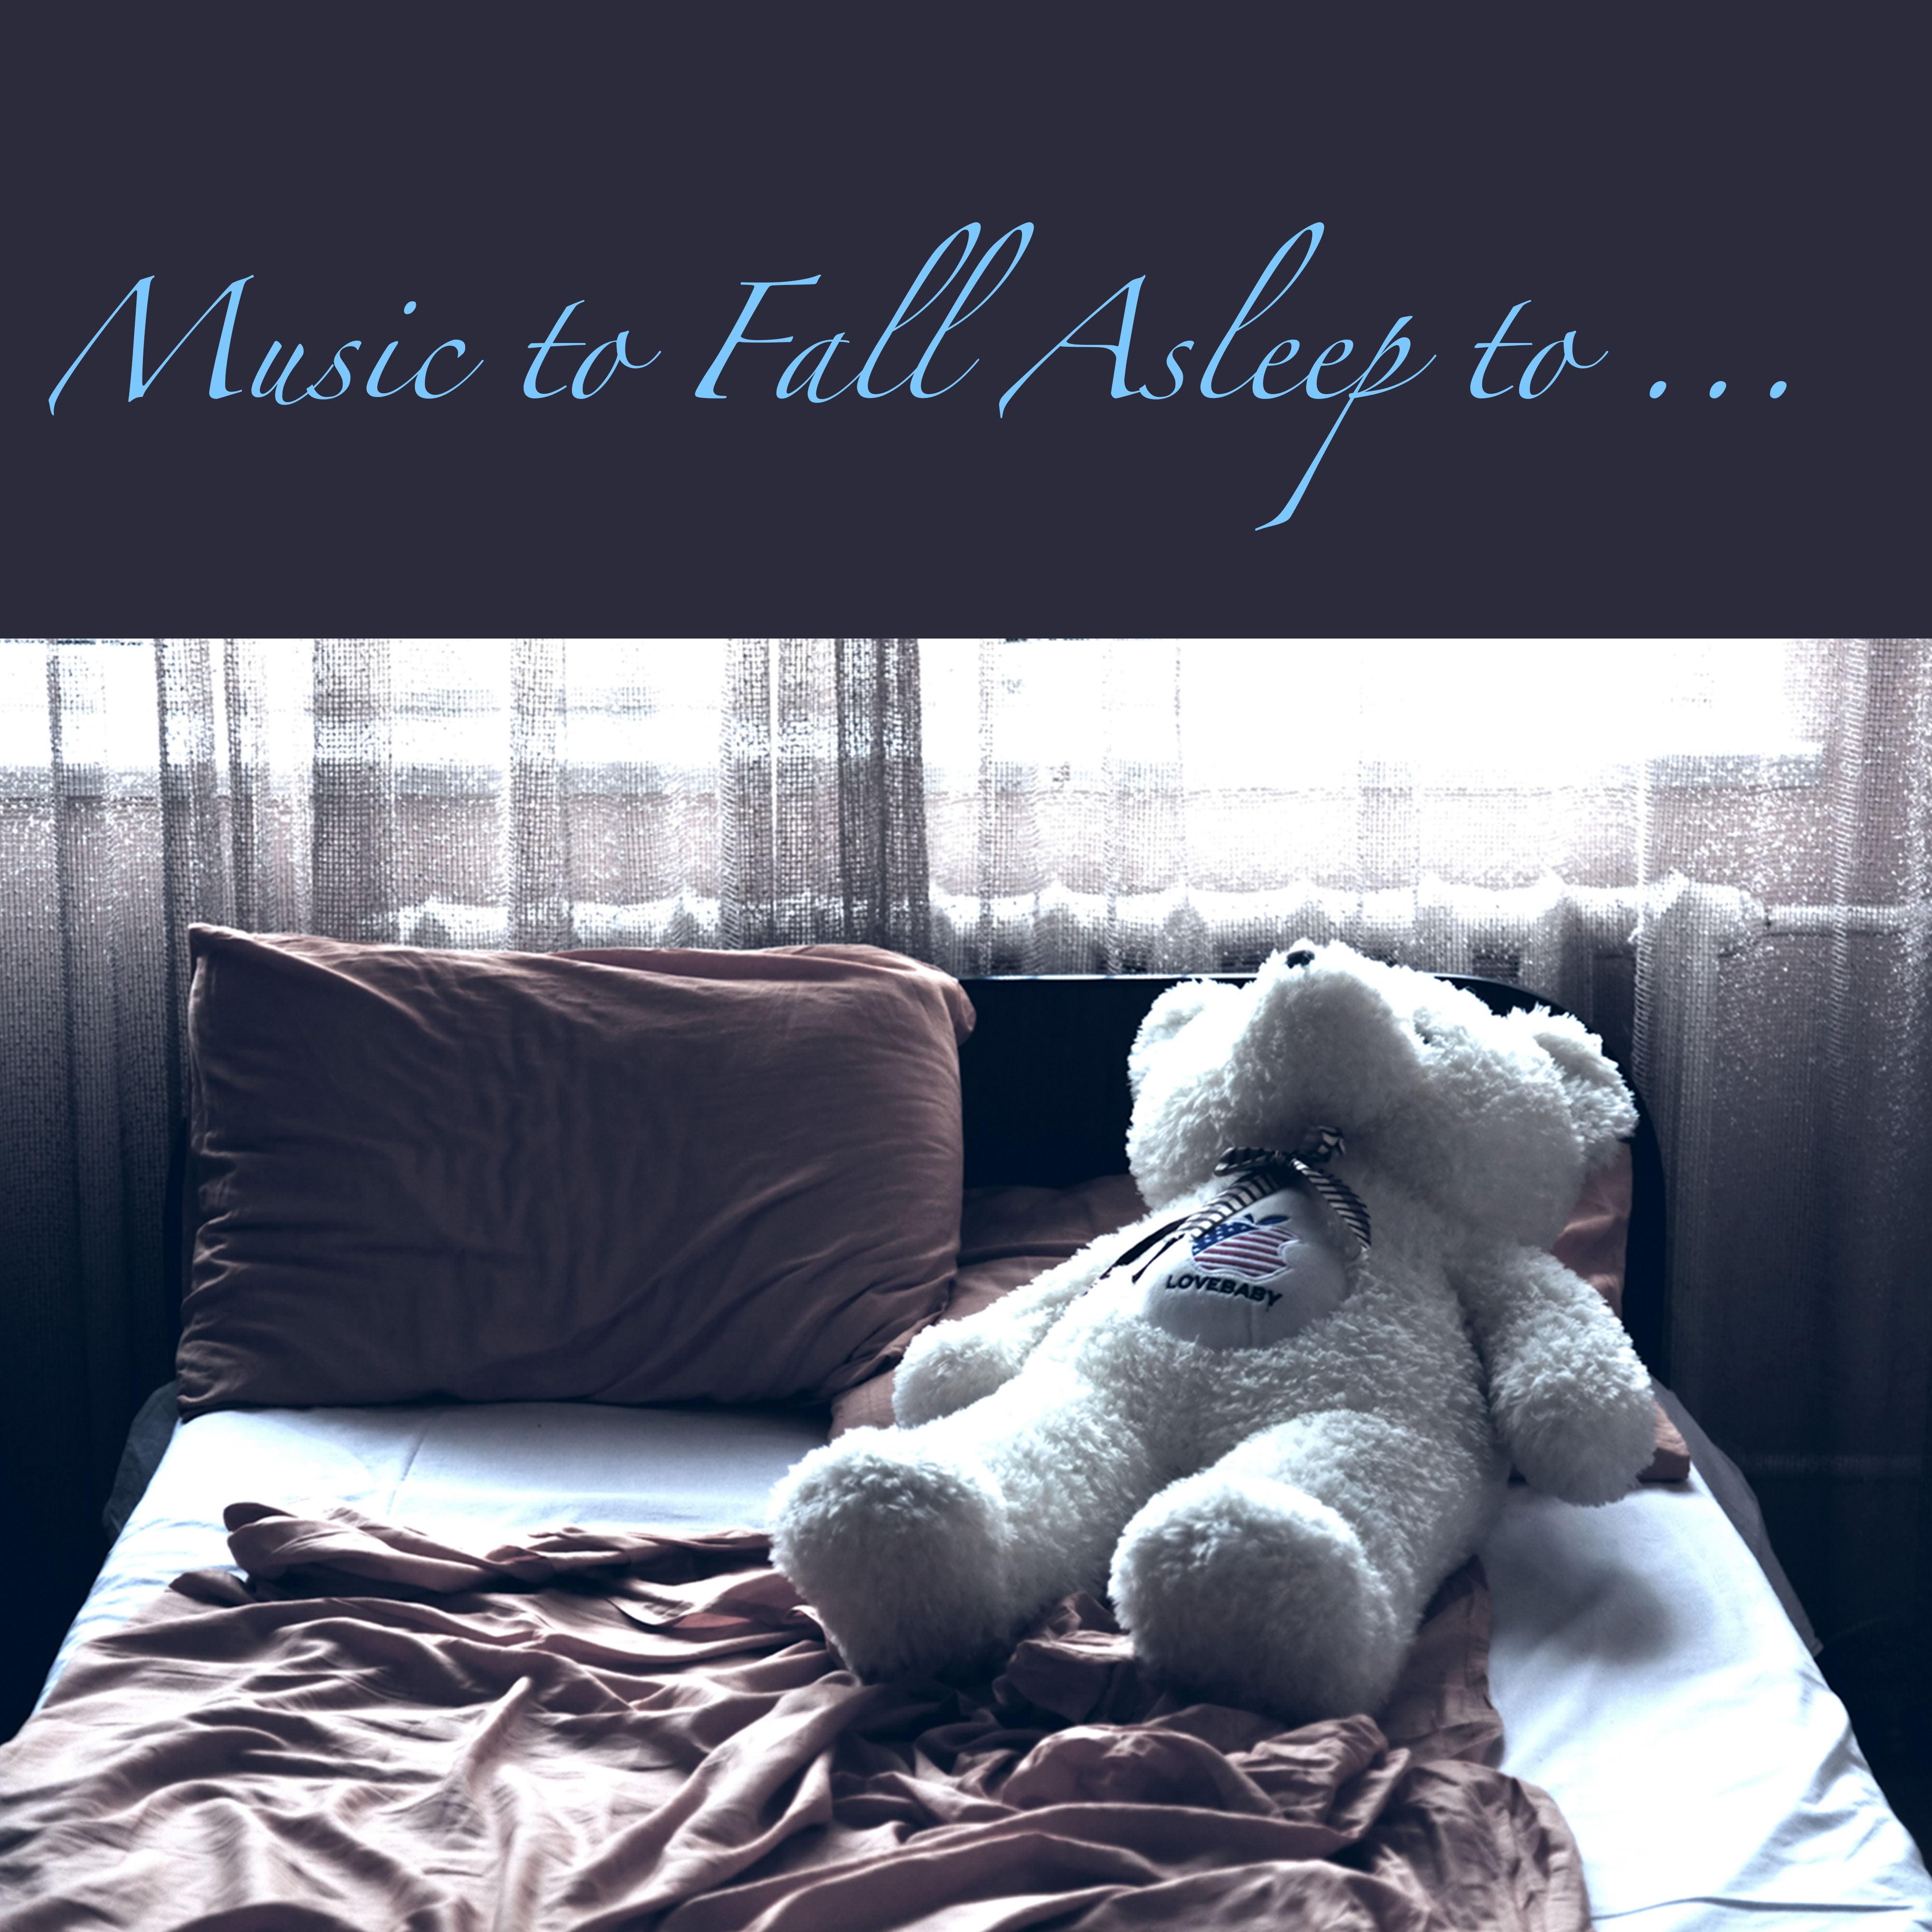 Music to Fall Asleep To  Falling Asleep with Calming and Peaceful Music, Nature Sounds Relaxing Songs